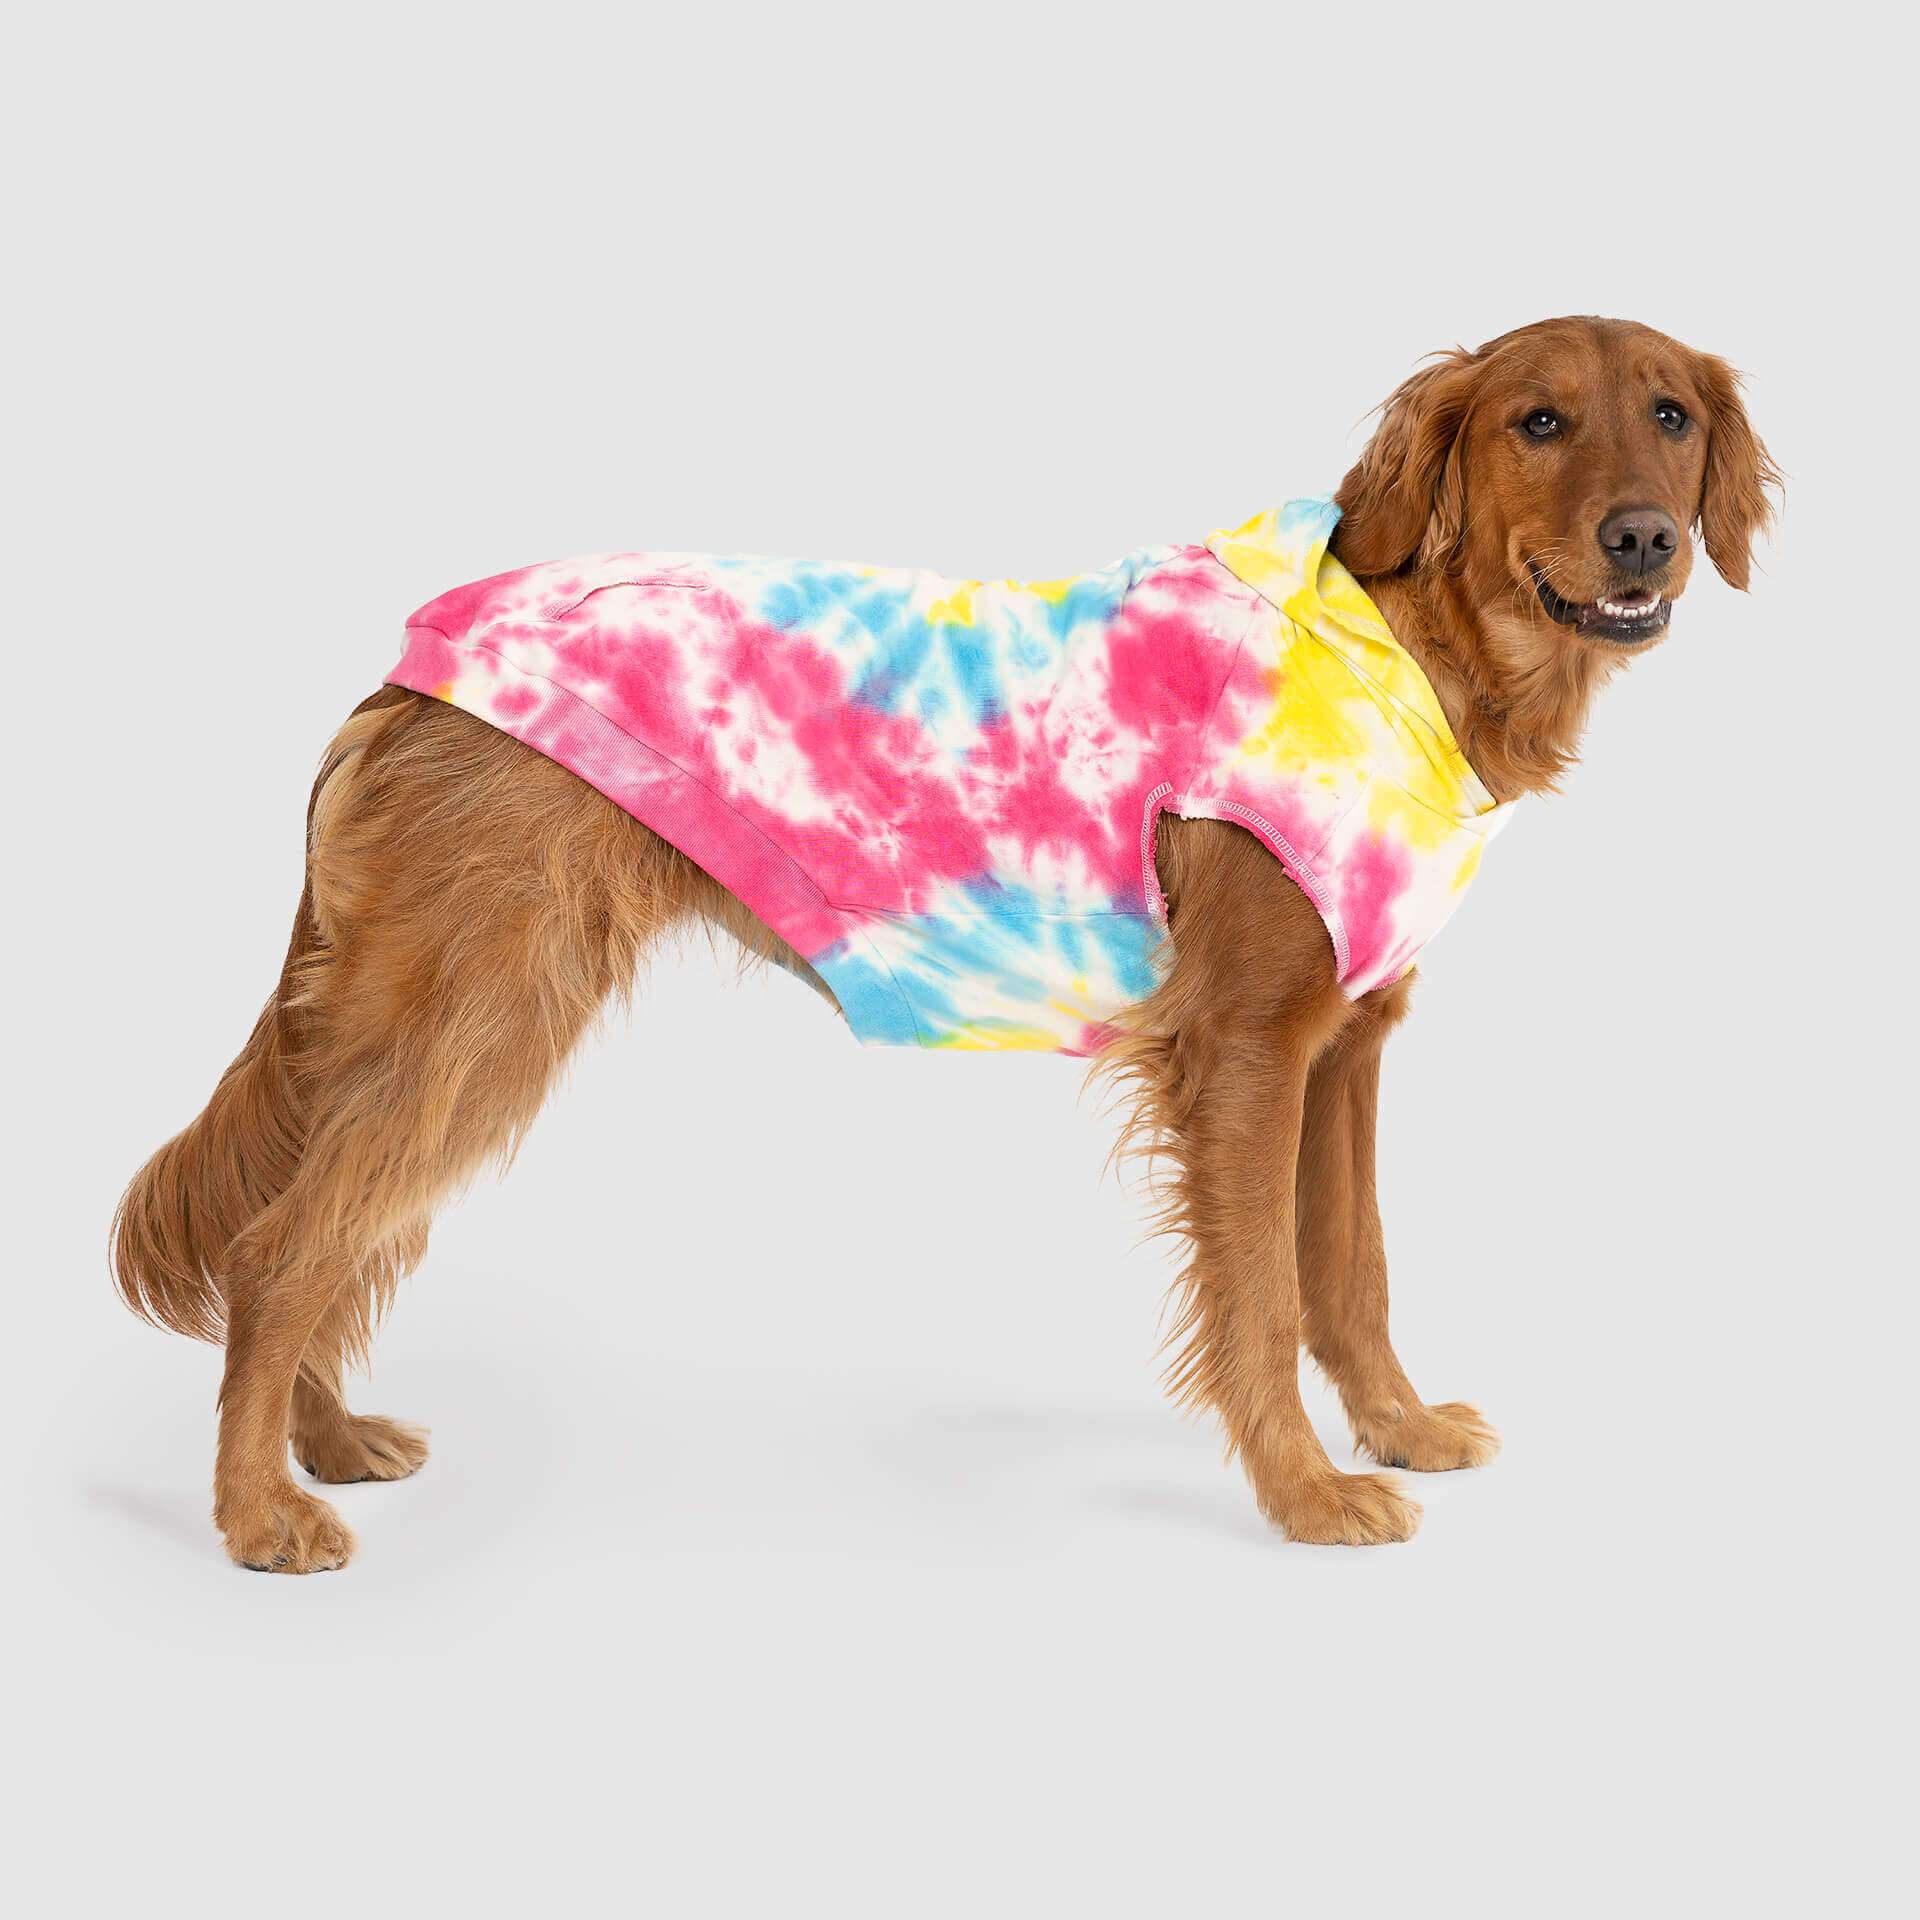 Functional Apparel - Clothing for Dogs